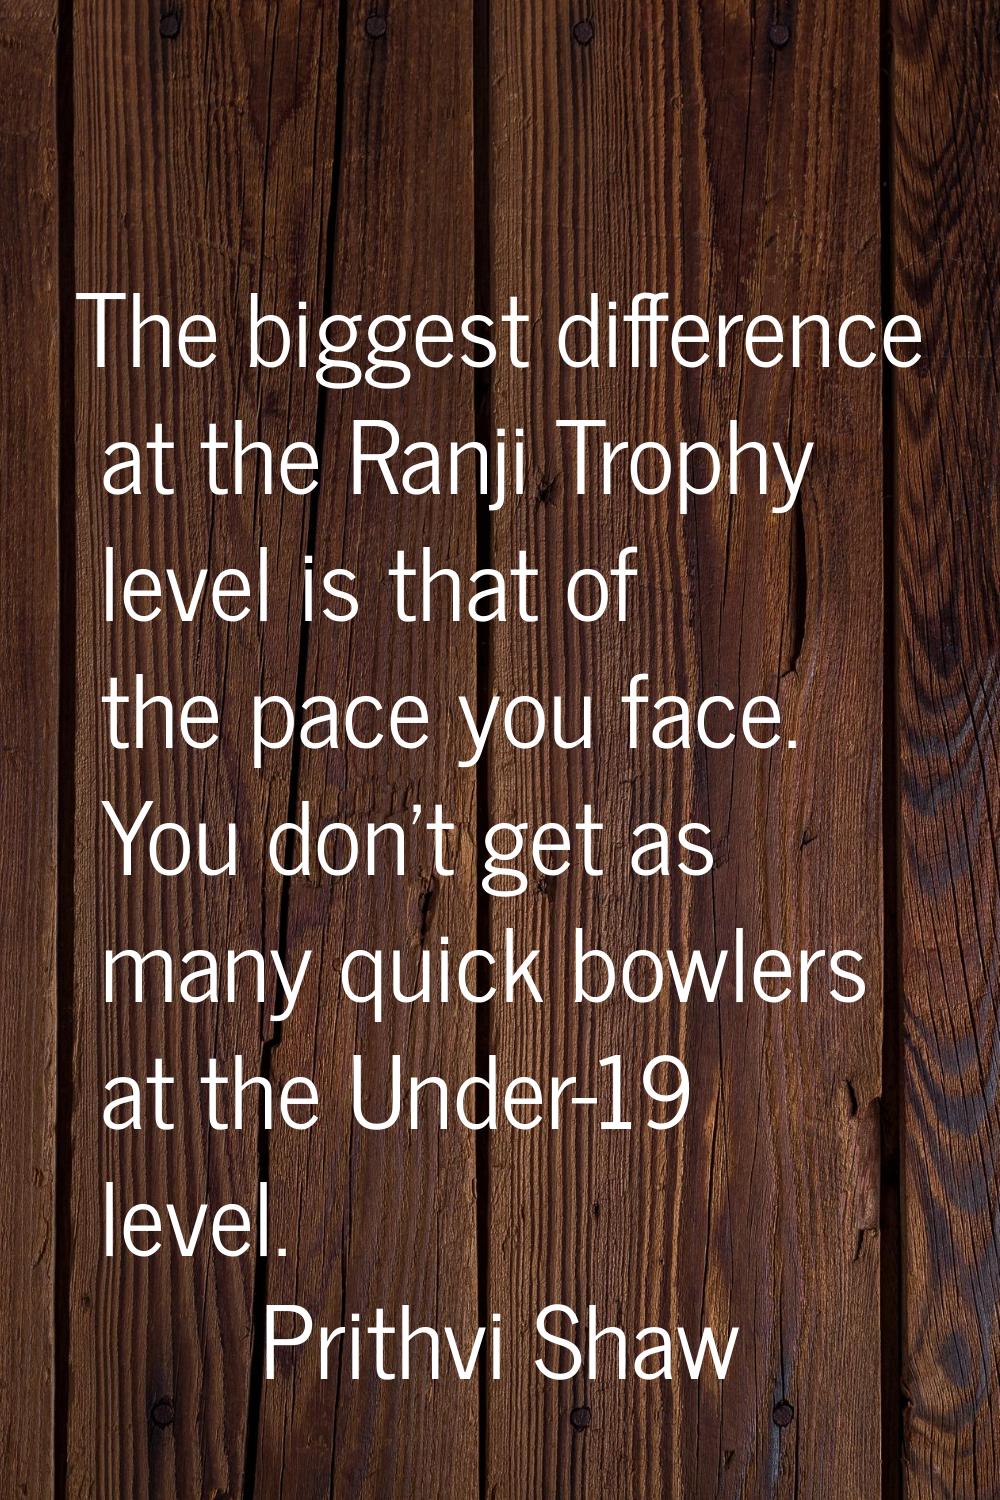 The biggest difference at the Ranji Trophy level is that of the pace you face. You don't get as man